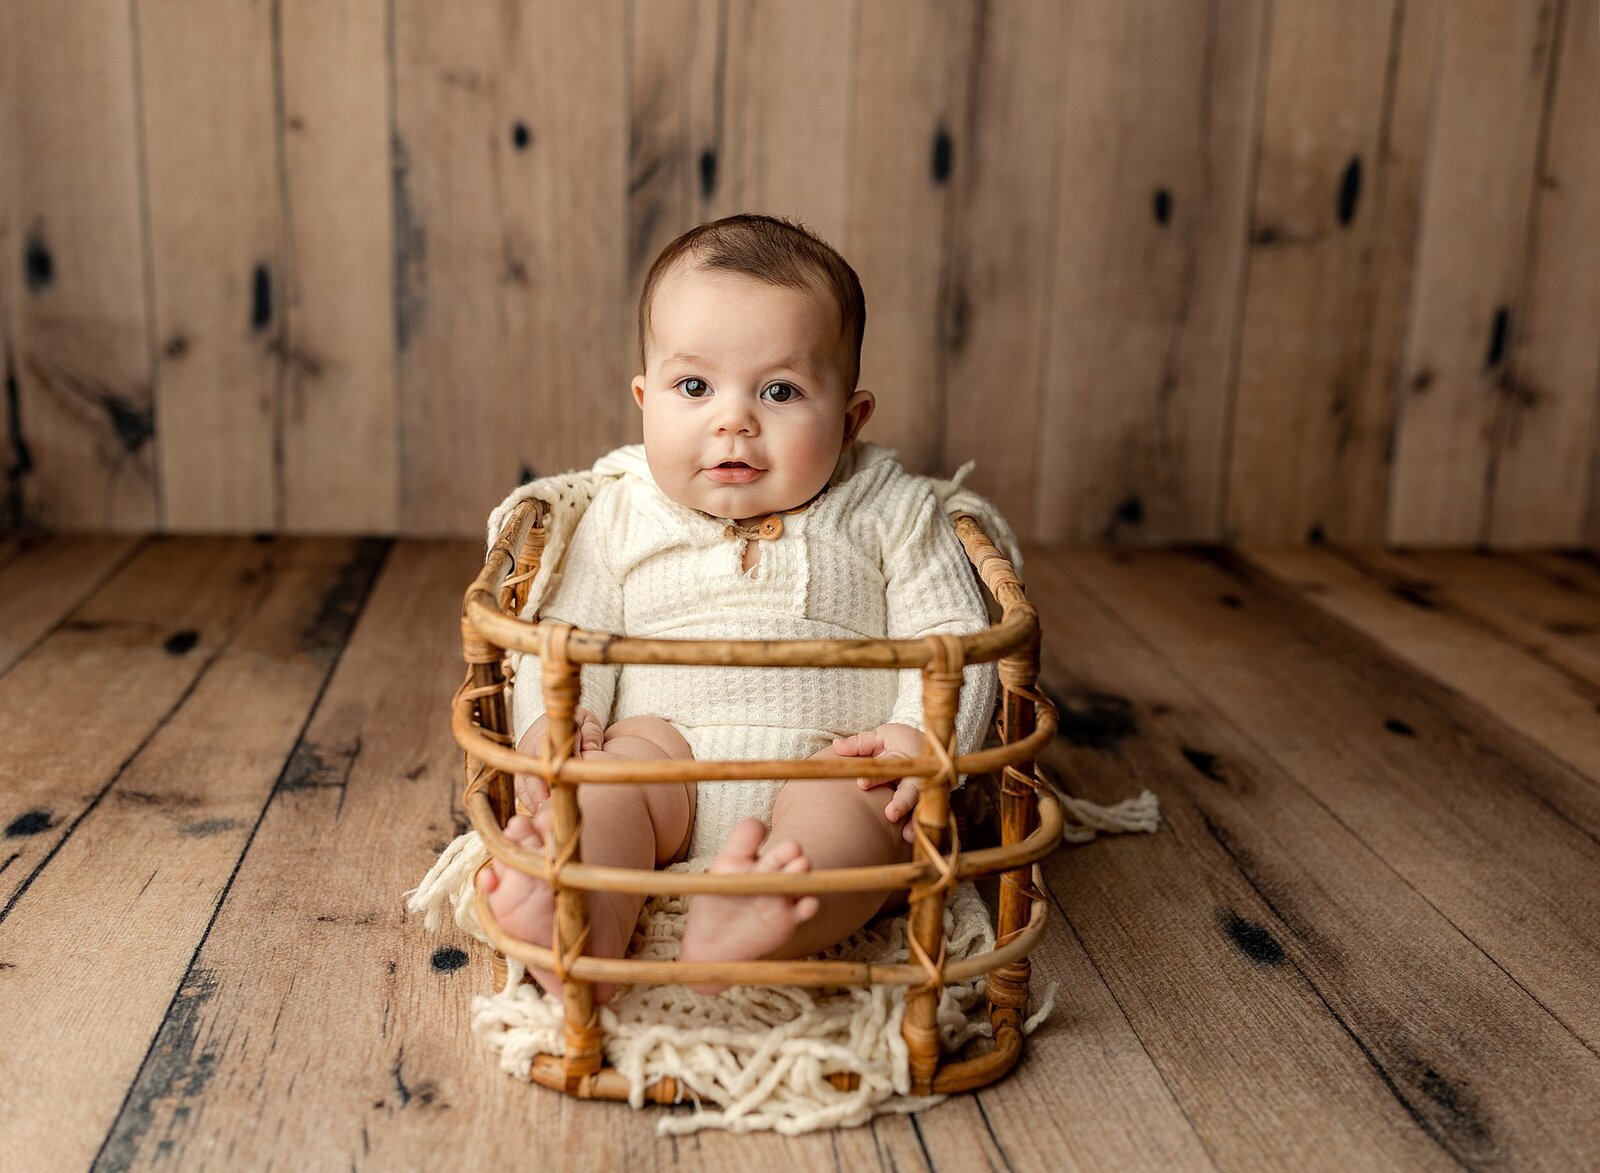 4 month old baby boy sitting in a basket for his milestone photography session.